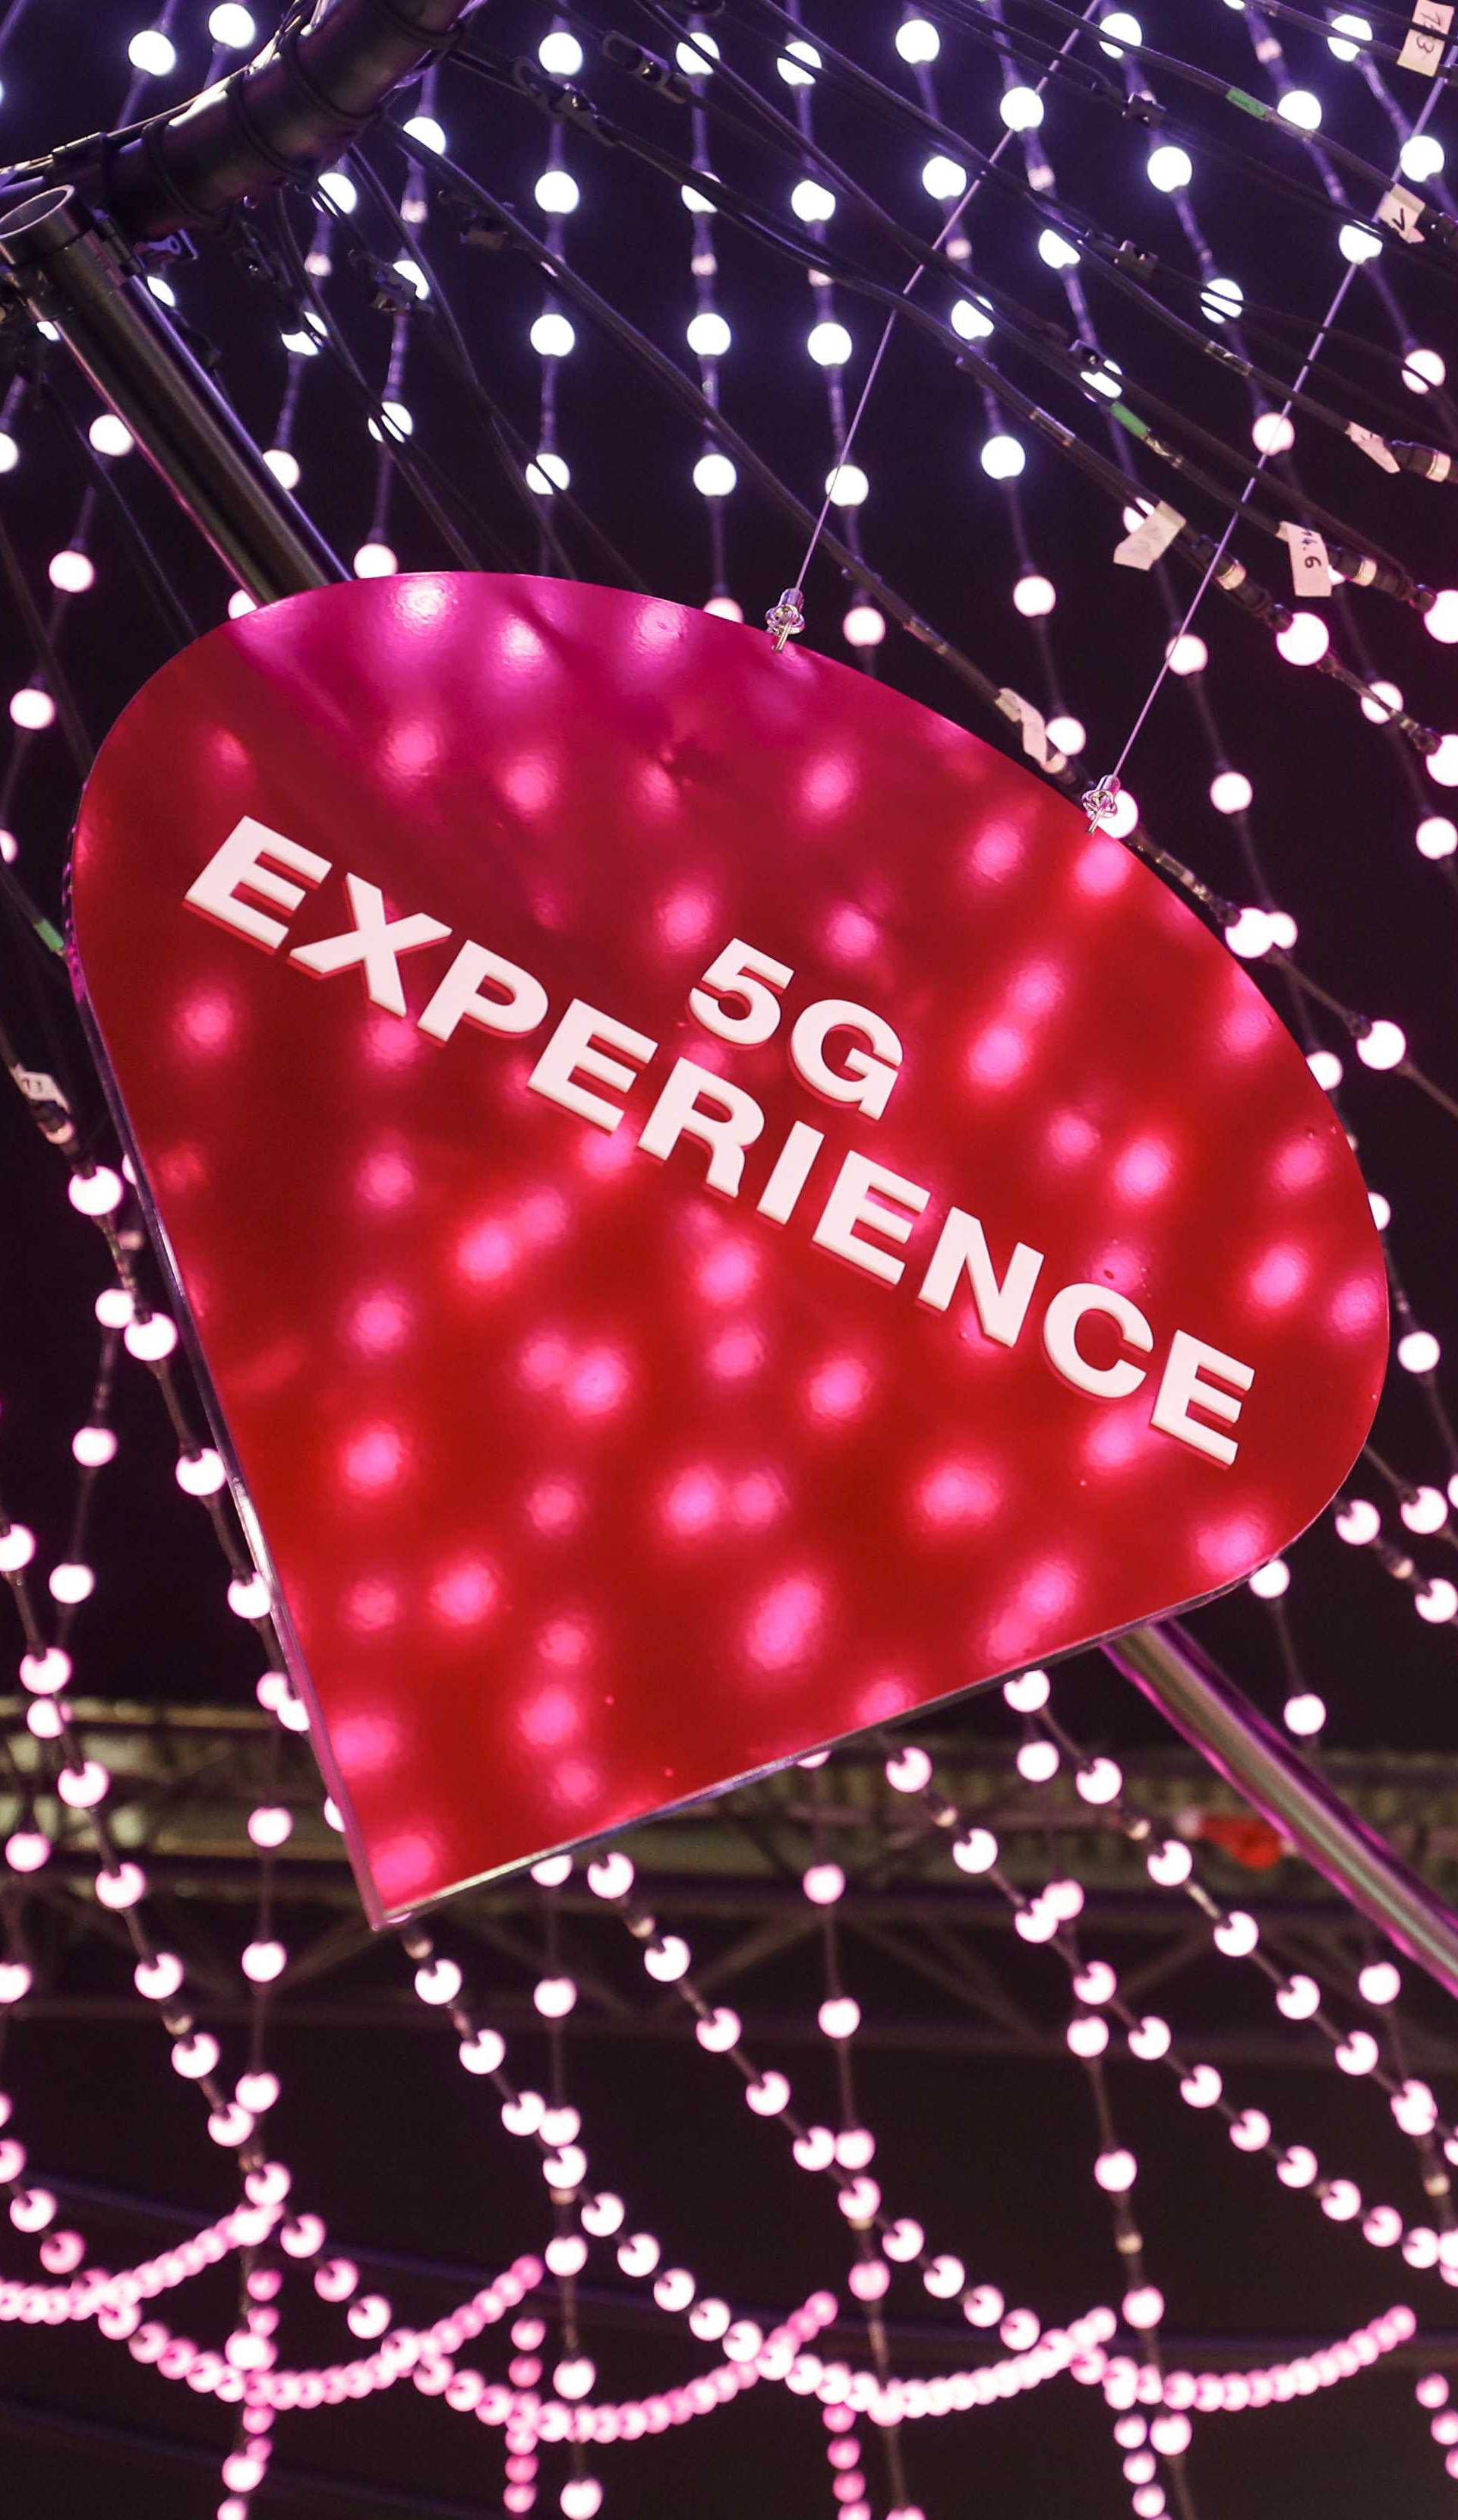 A 5G banner hanging at the Deutsche Telekom booth is seen at the Mobile World Congress in Barcelona